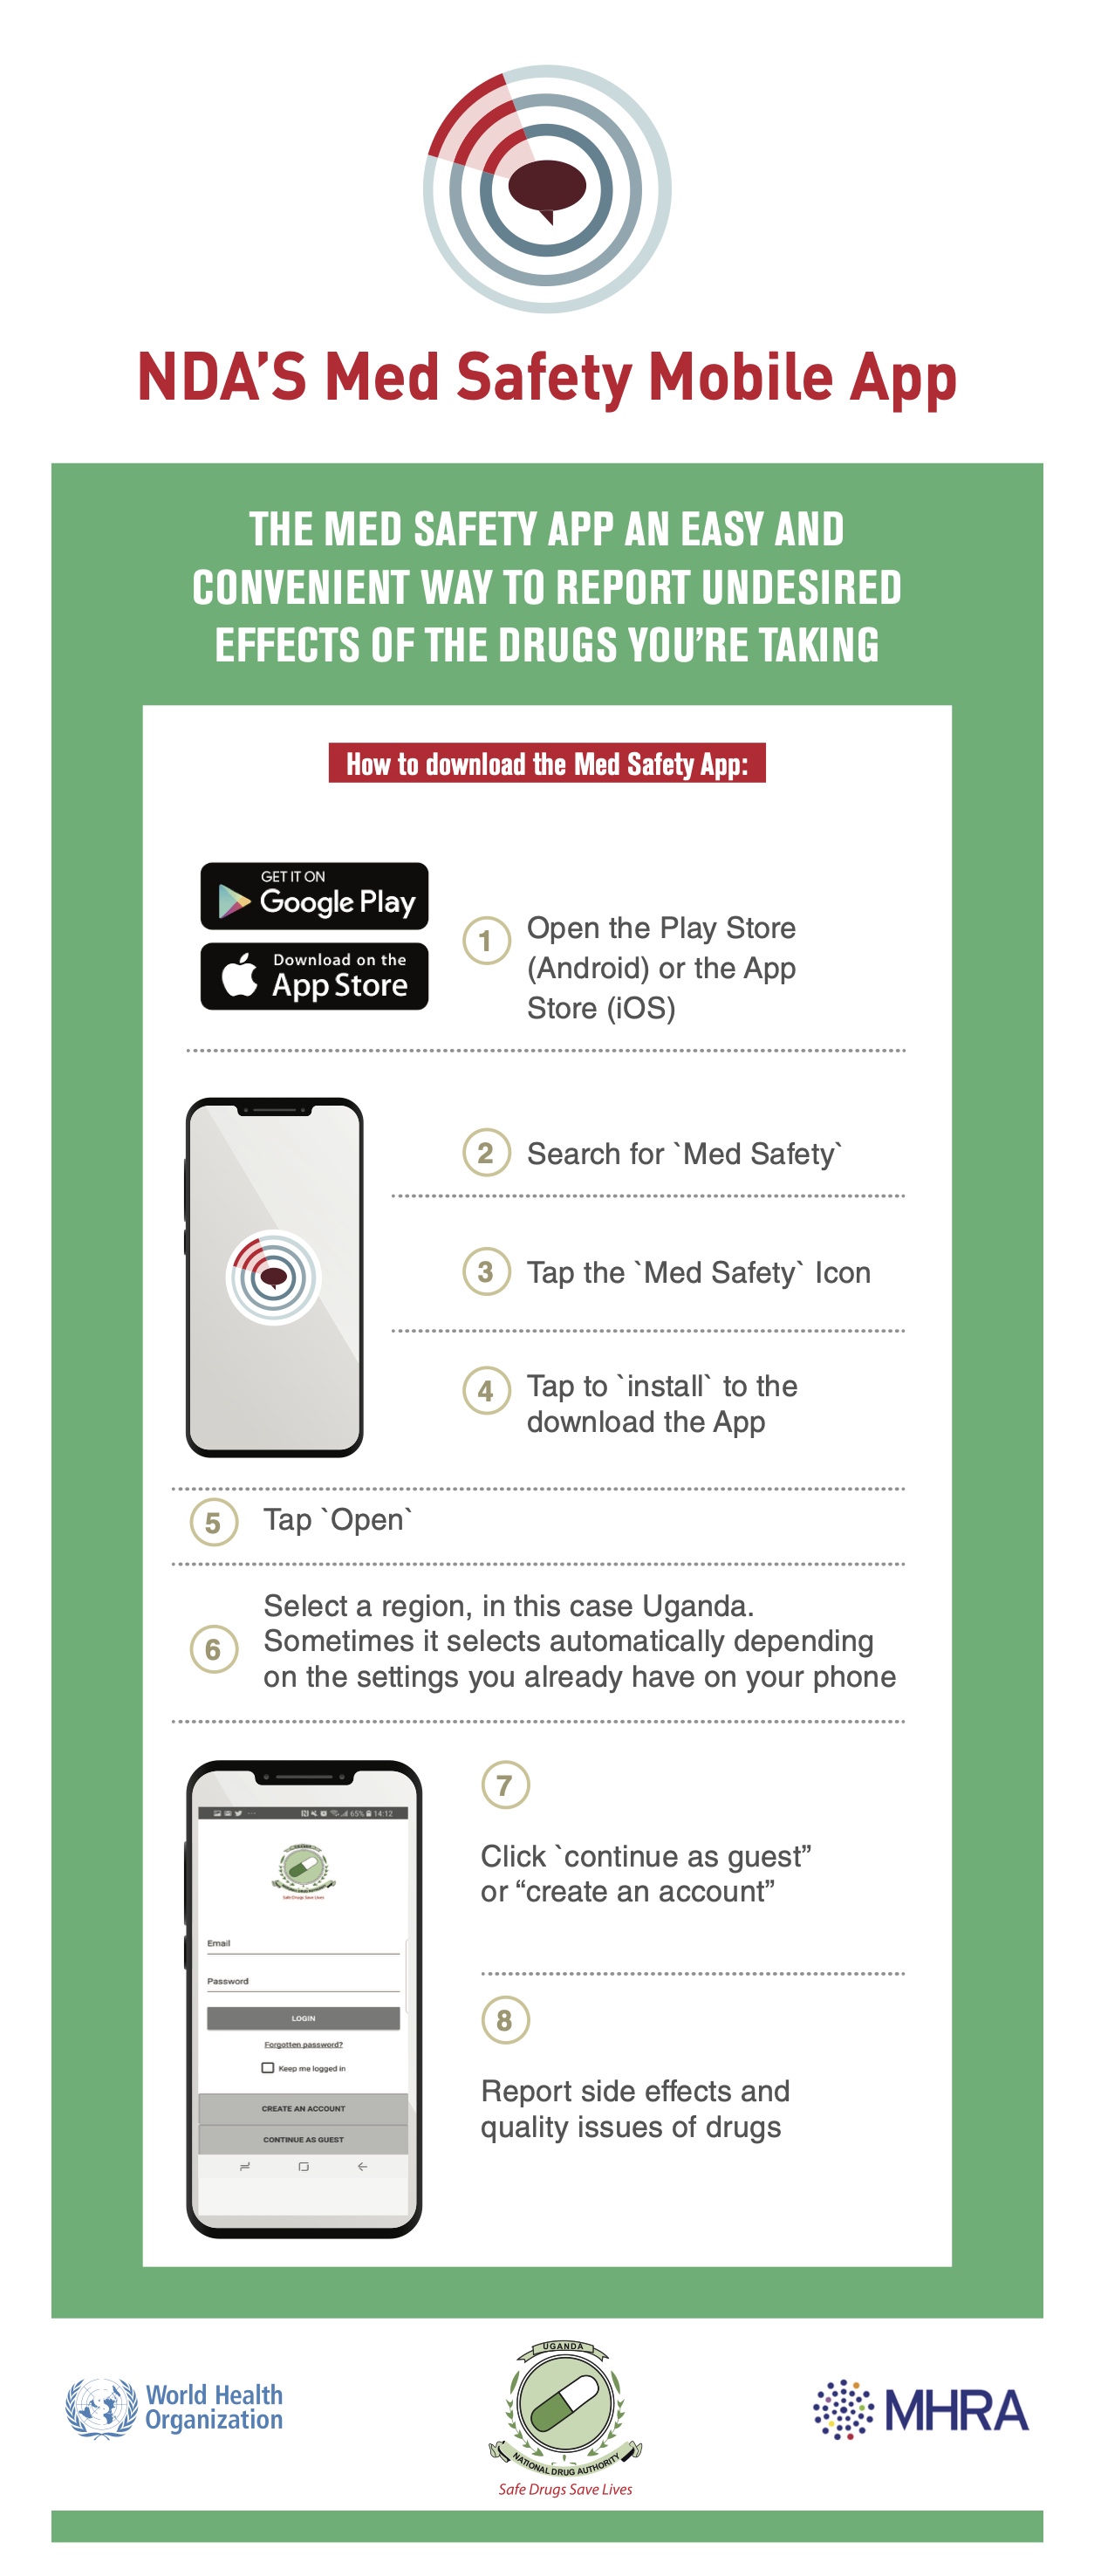 The Med Safety App is available from Google Play (Android) and Apple App Store (iOS).